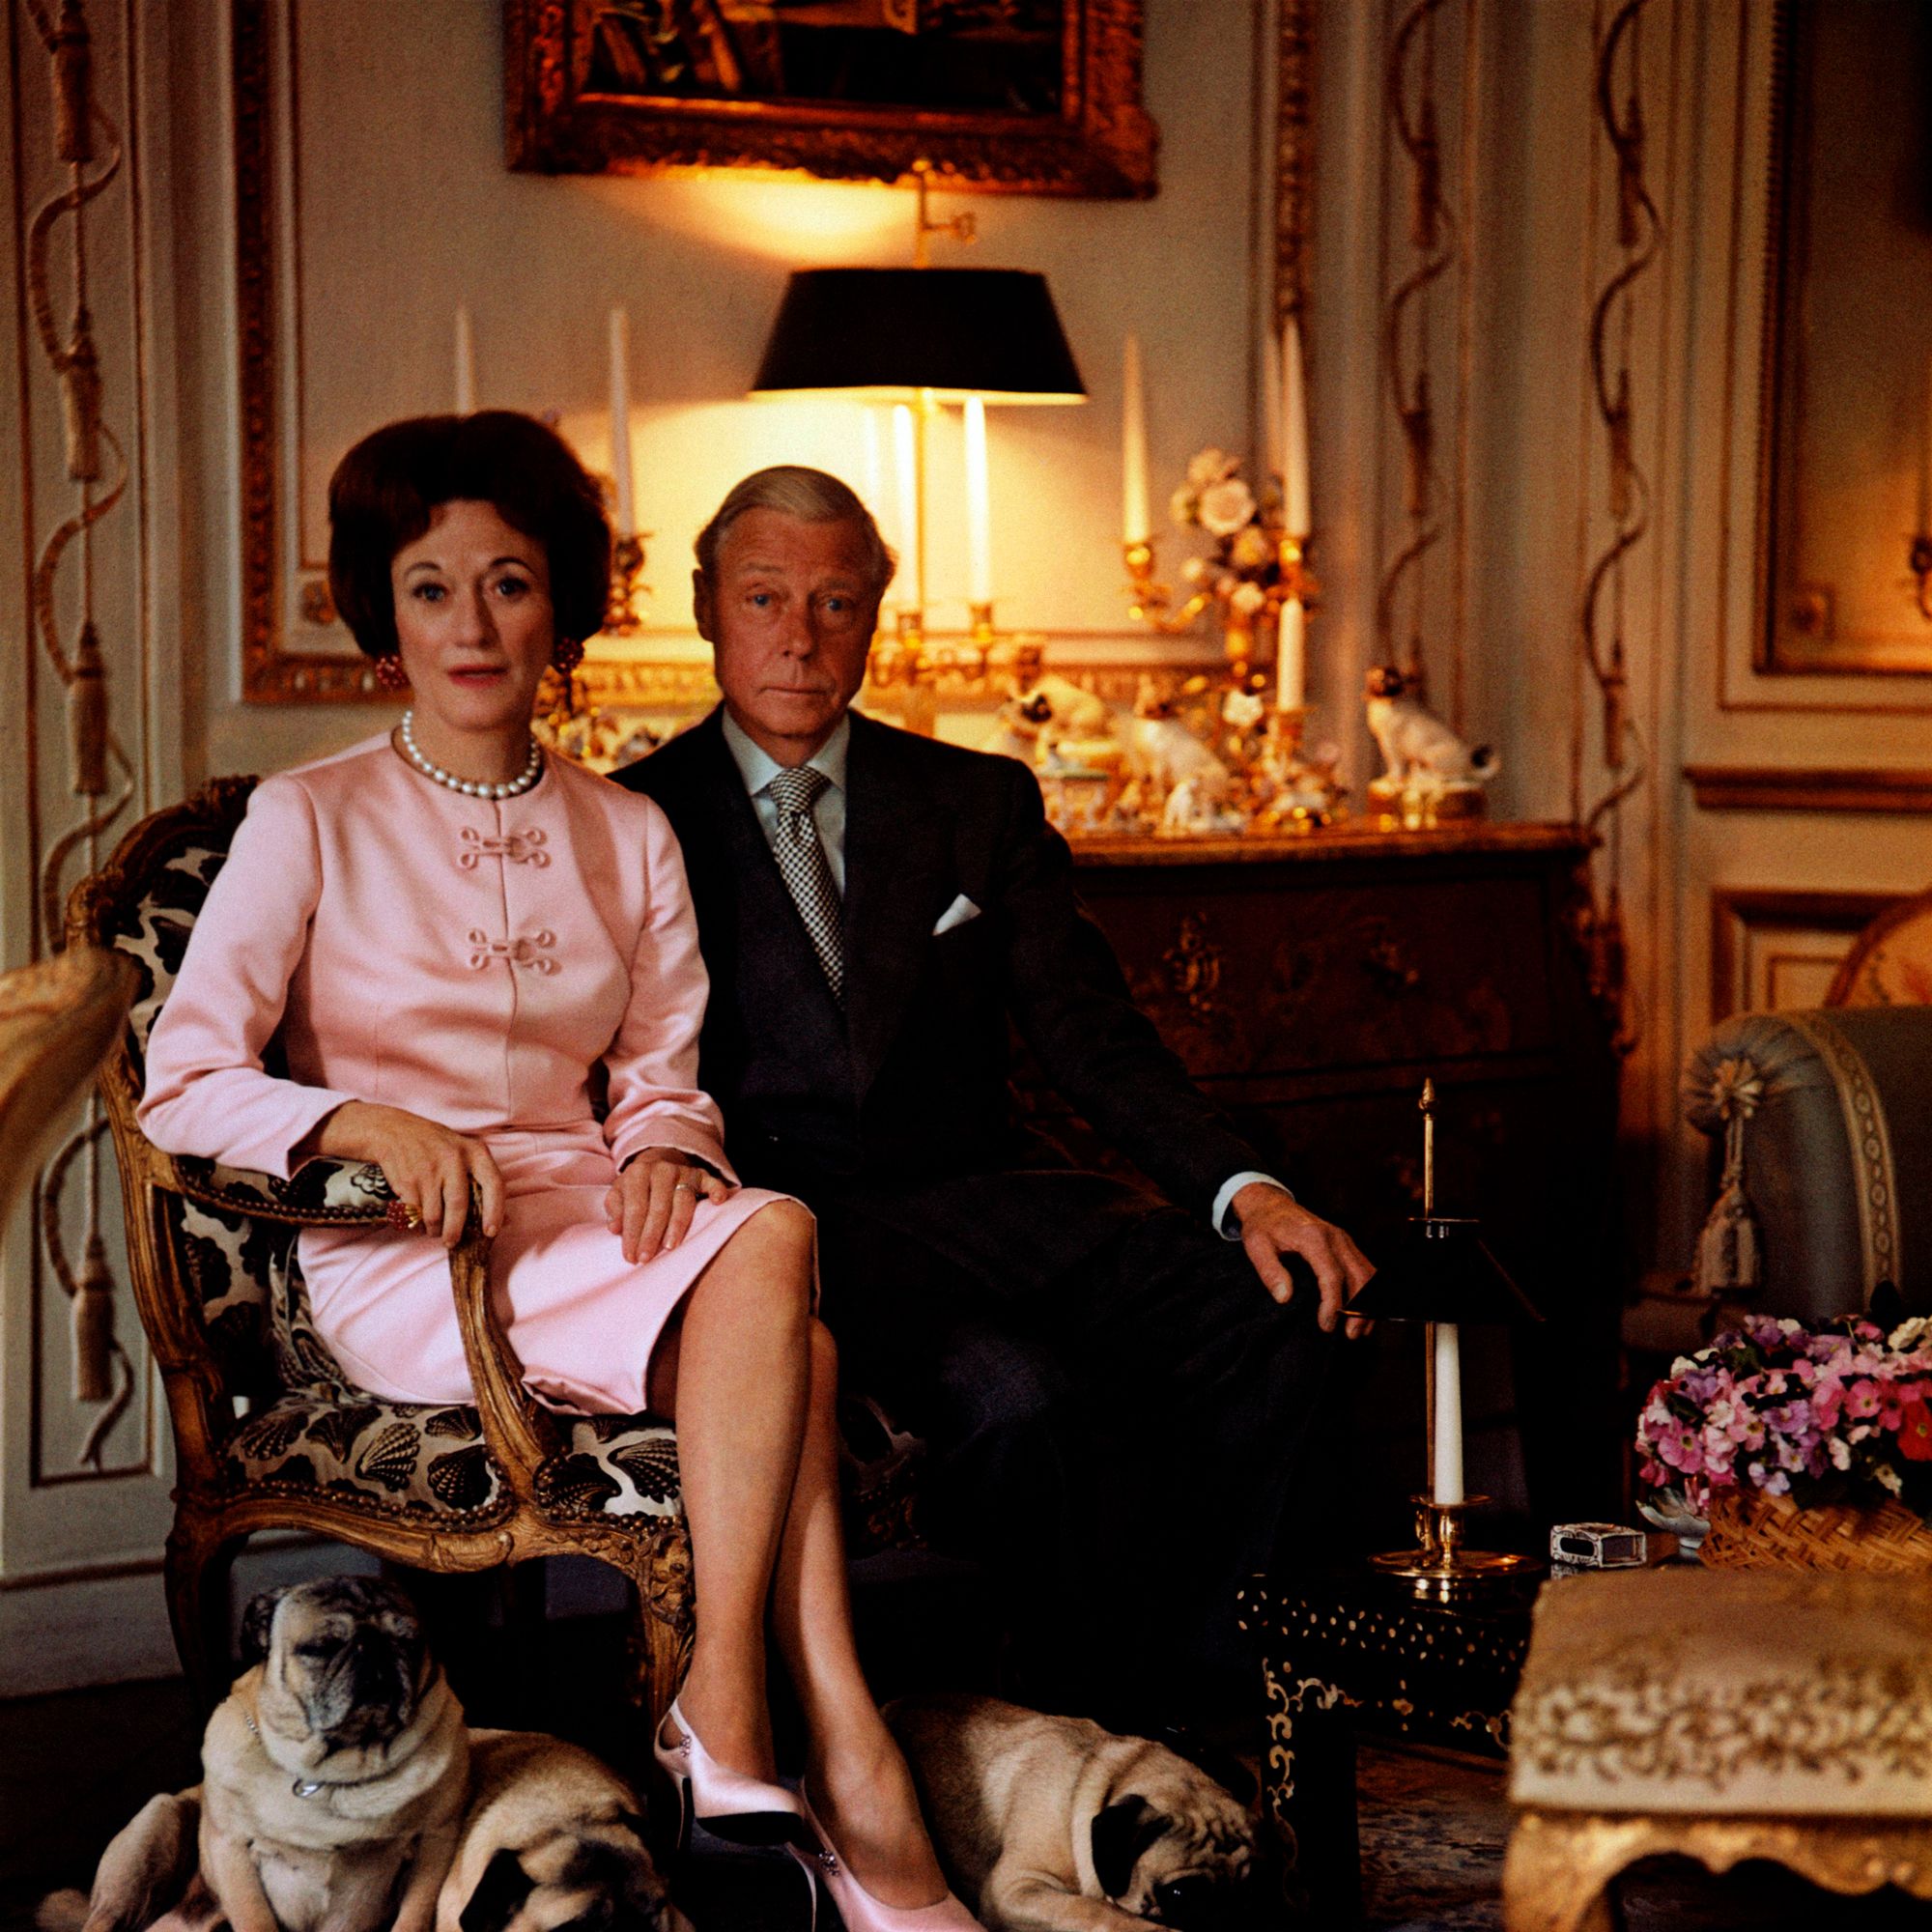 See the Duke of Windsor & Wallis Simpson's French Home from 'The